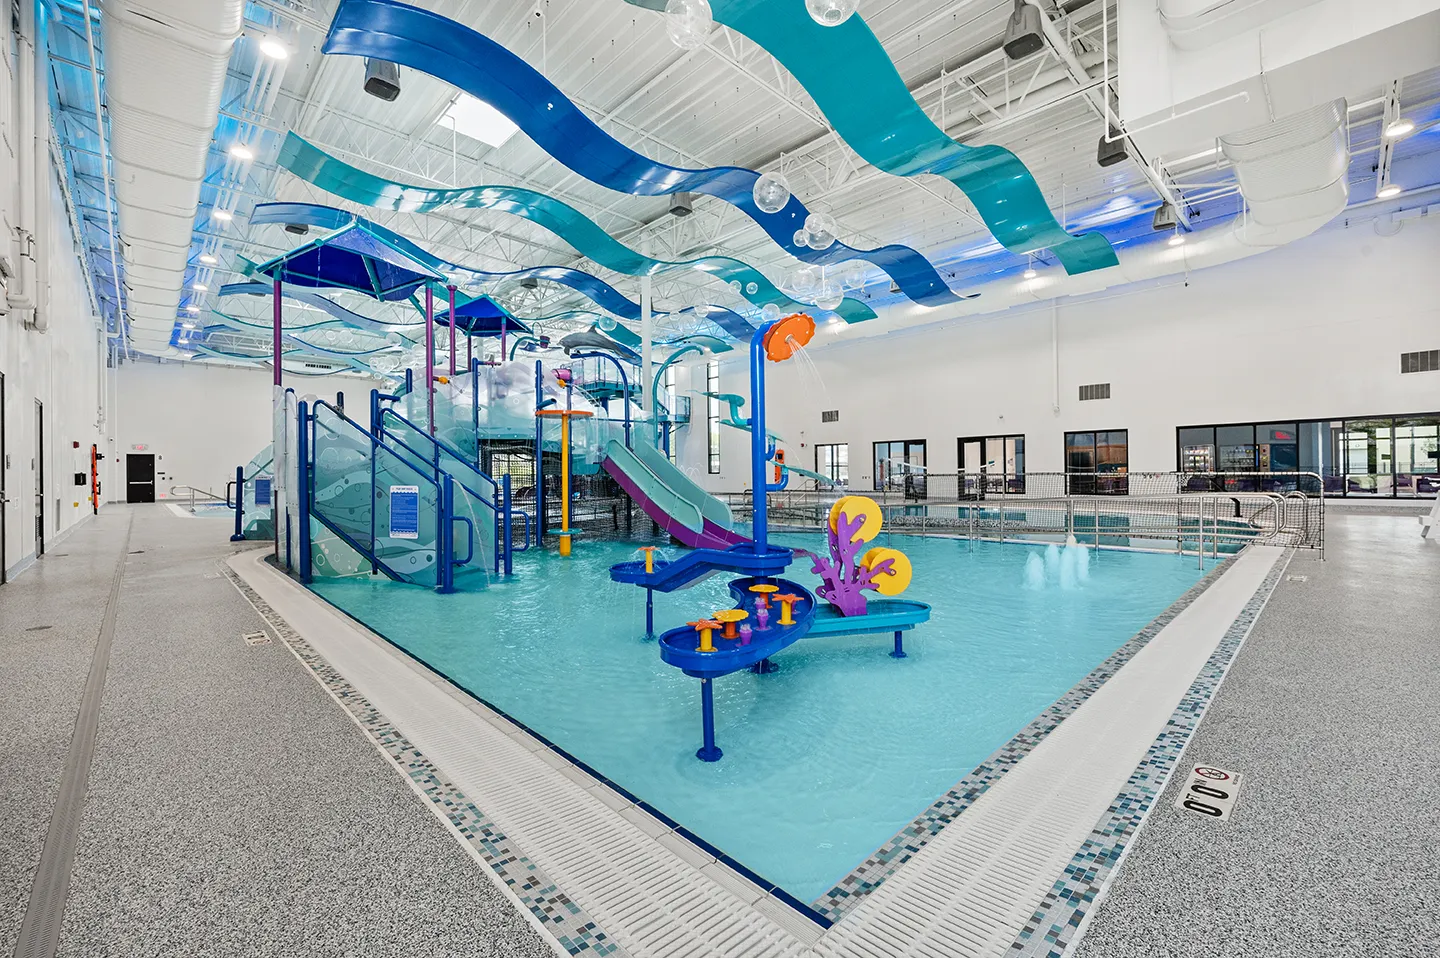 The center features an 11,400-square-foot natatorium, which includes a large internally lit water slide, a zero-depth entry zone for wheelchair accessibility, and access to a tiered play feature.